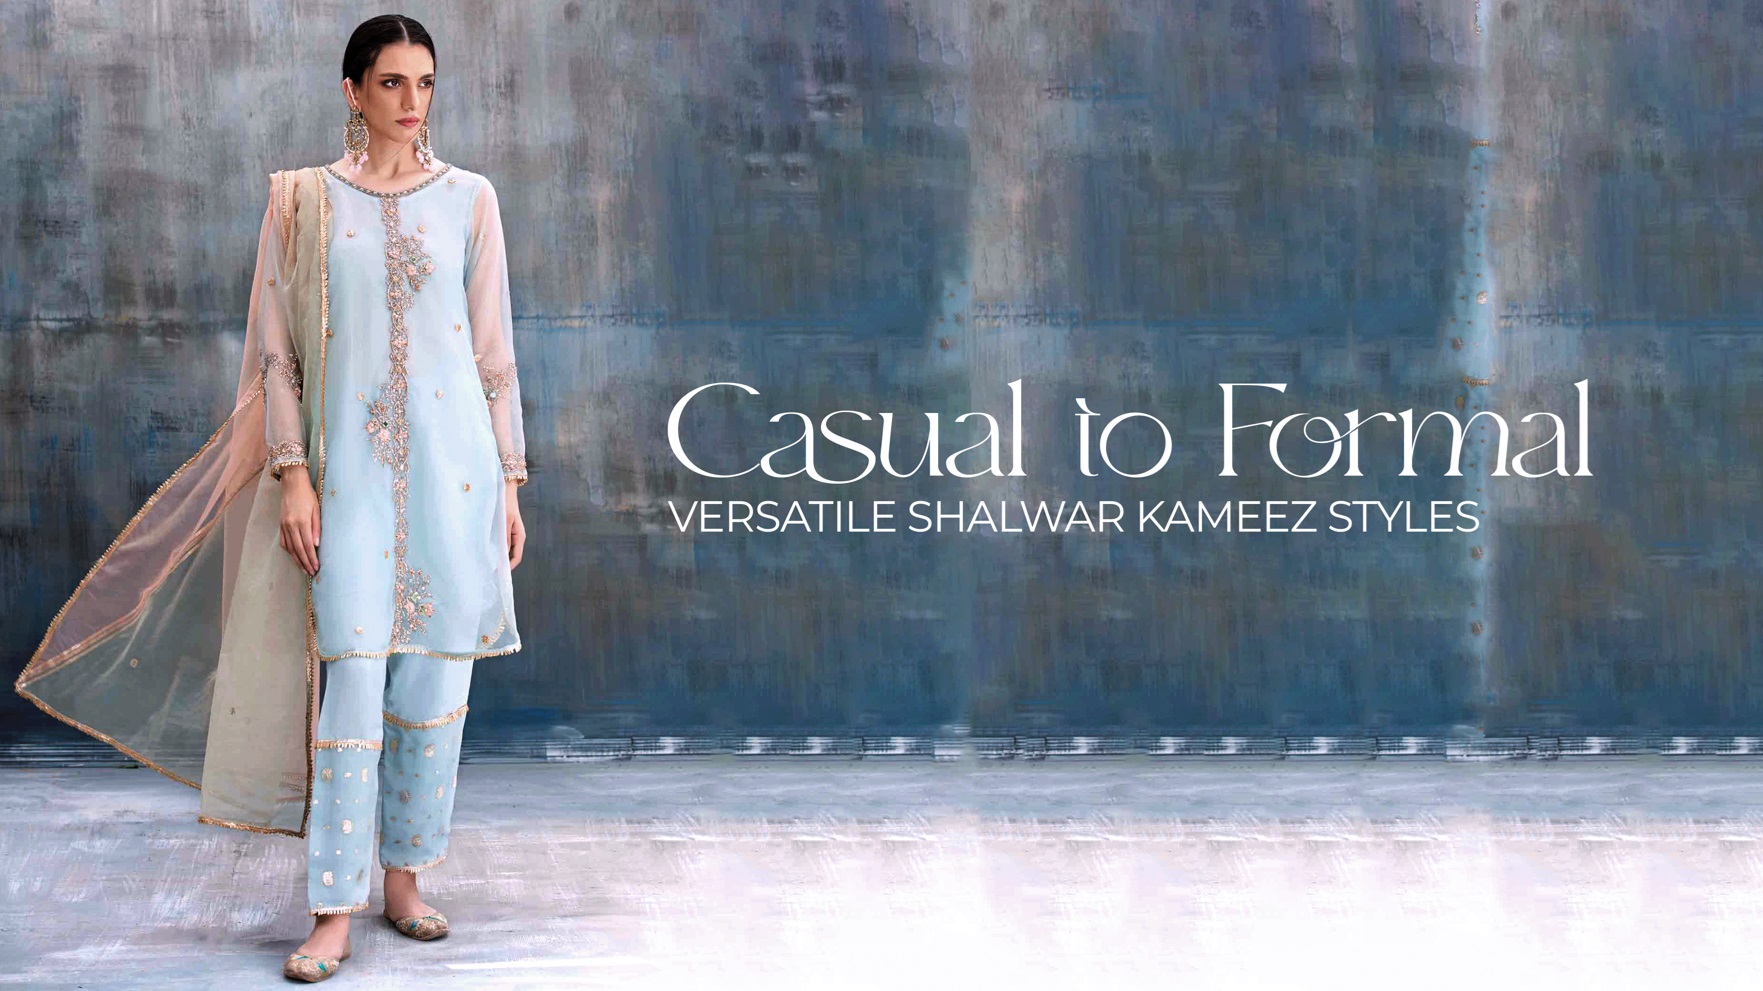 From Casual to Formal: Versatile Shalwar Kameez Styles